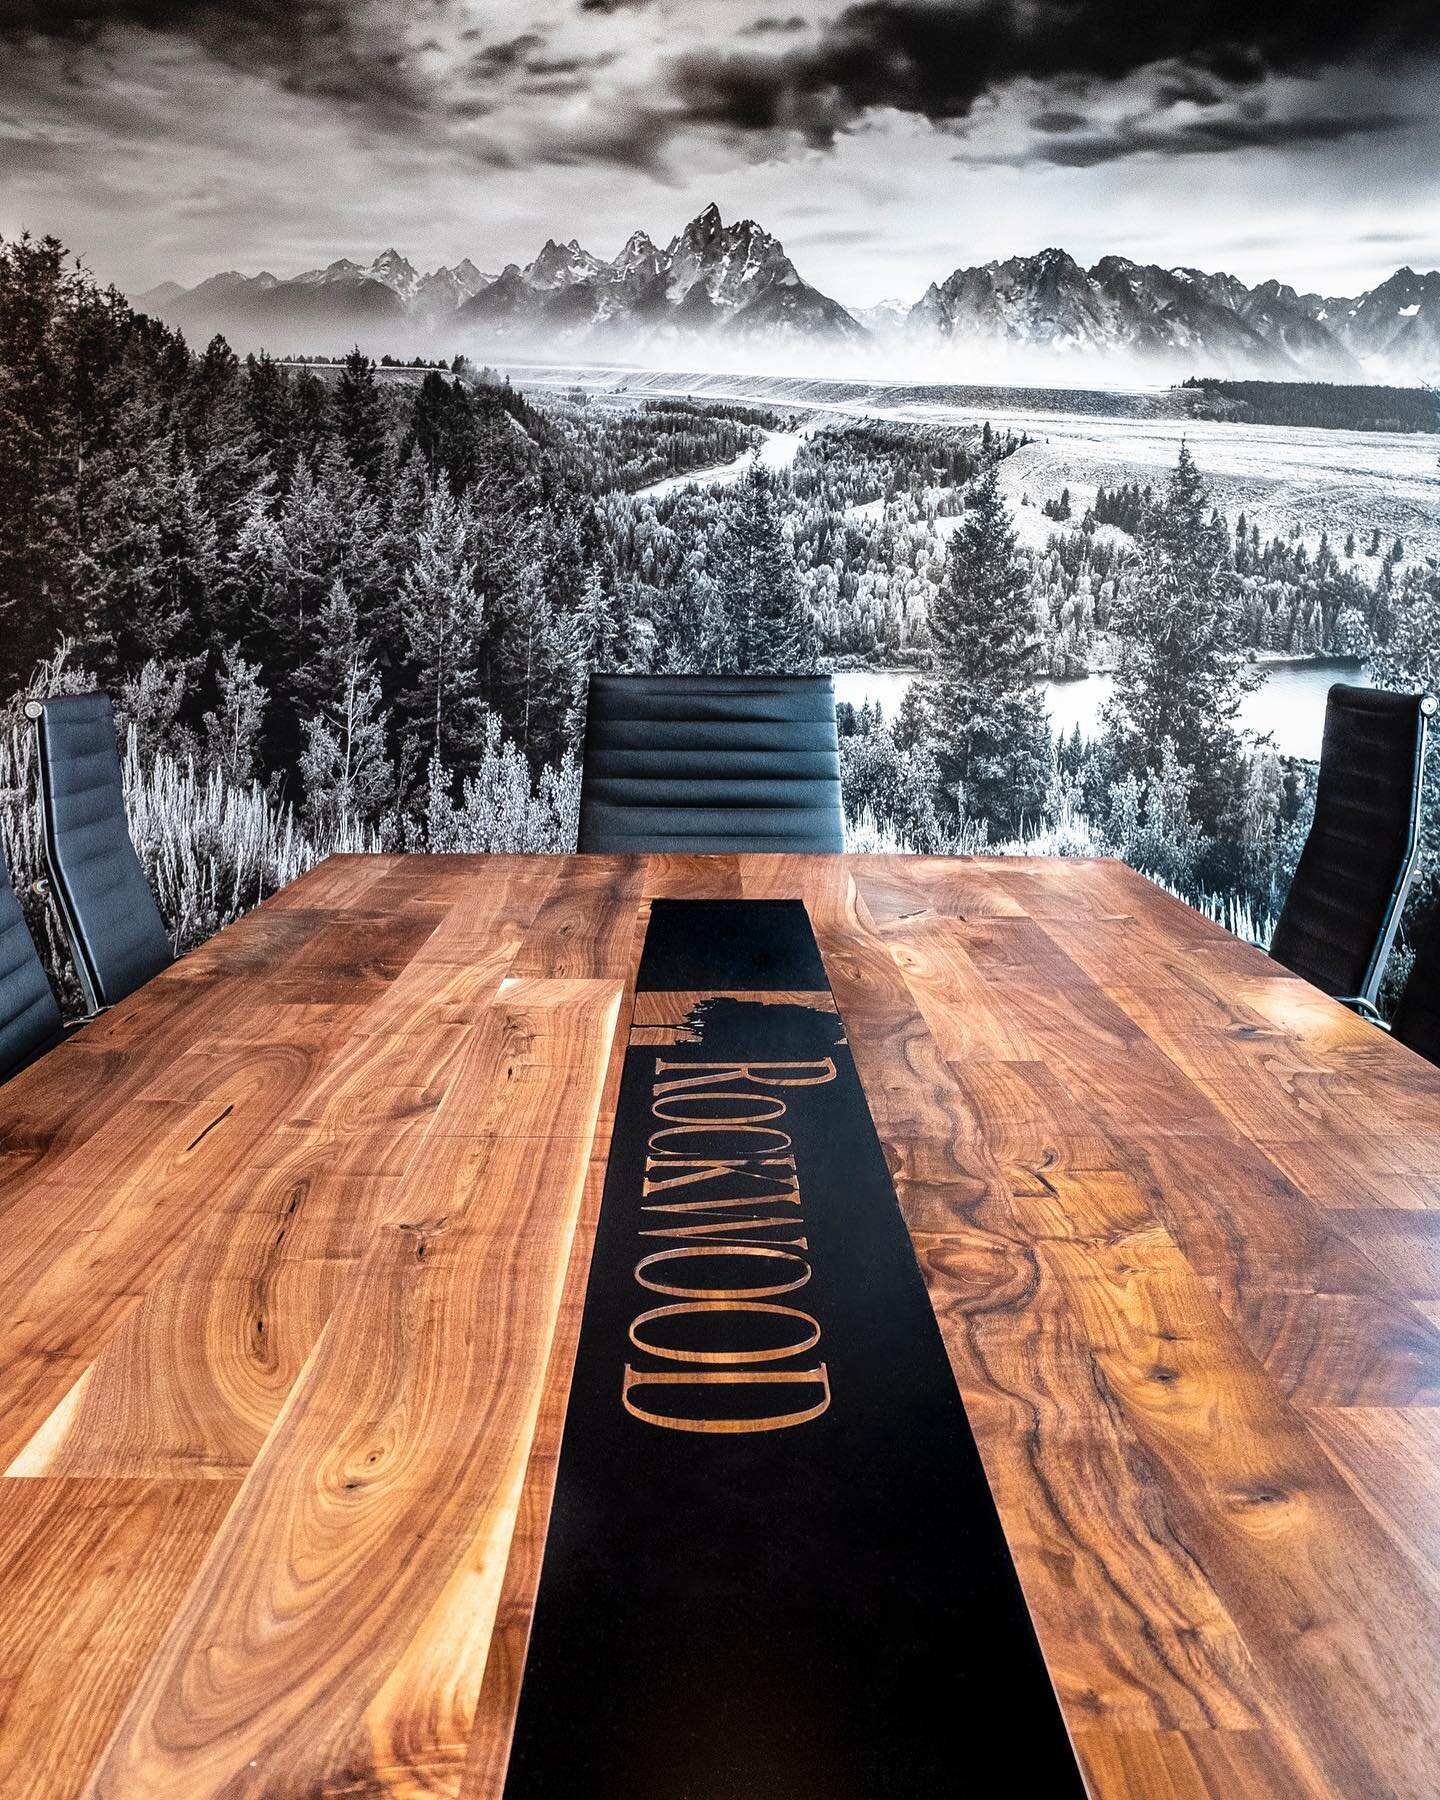 Conference Room pic! @revamptgoods designed and fabricated this sweet custom conference table for us, wall by @muralsyourway #eameschairs pic by @brettfoxstudio 🖤